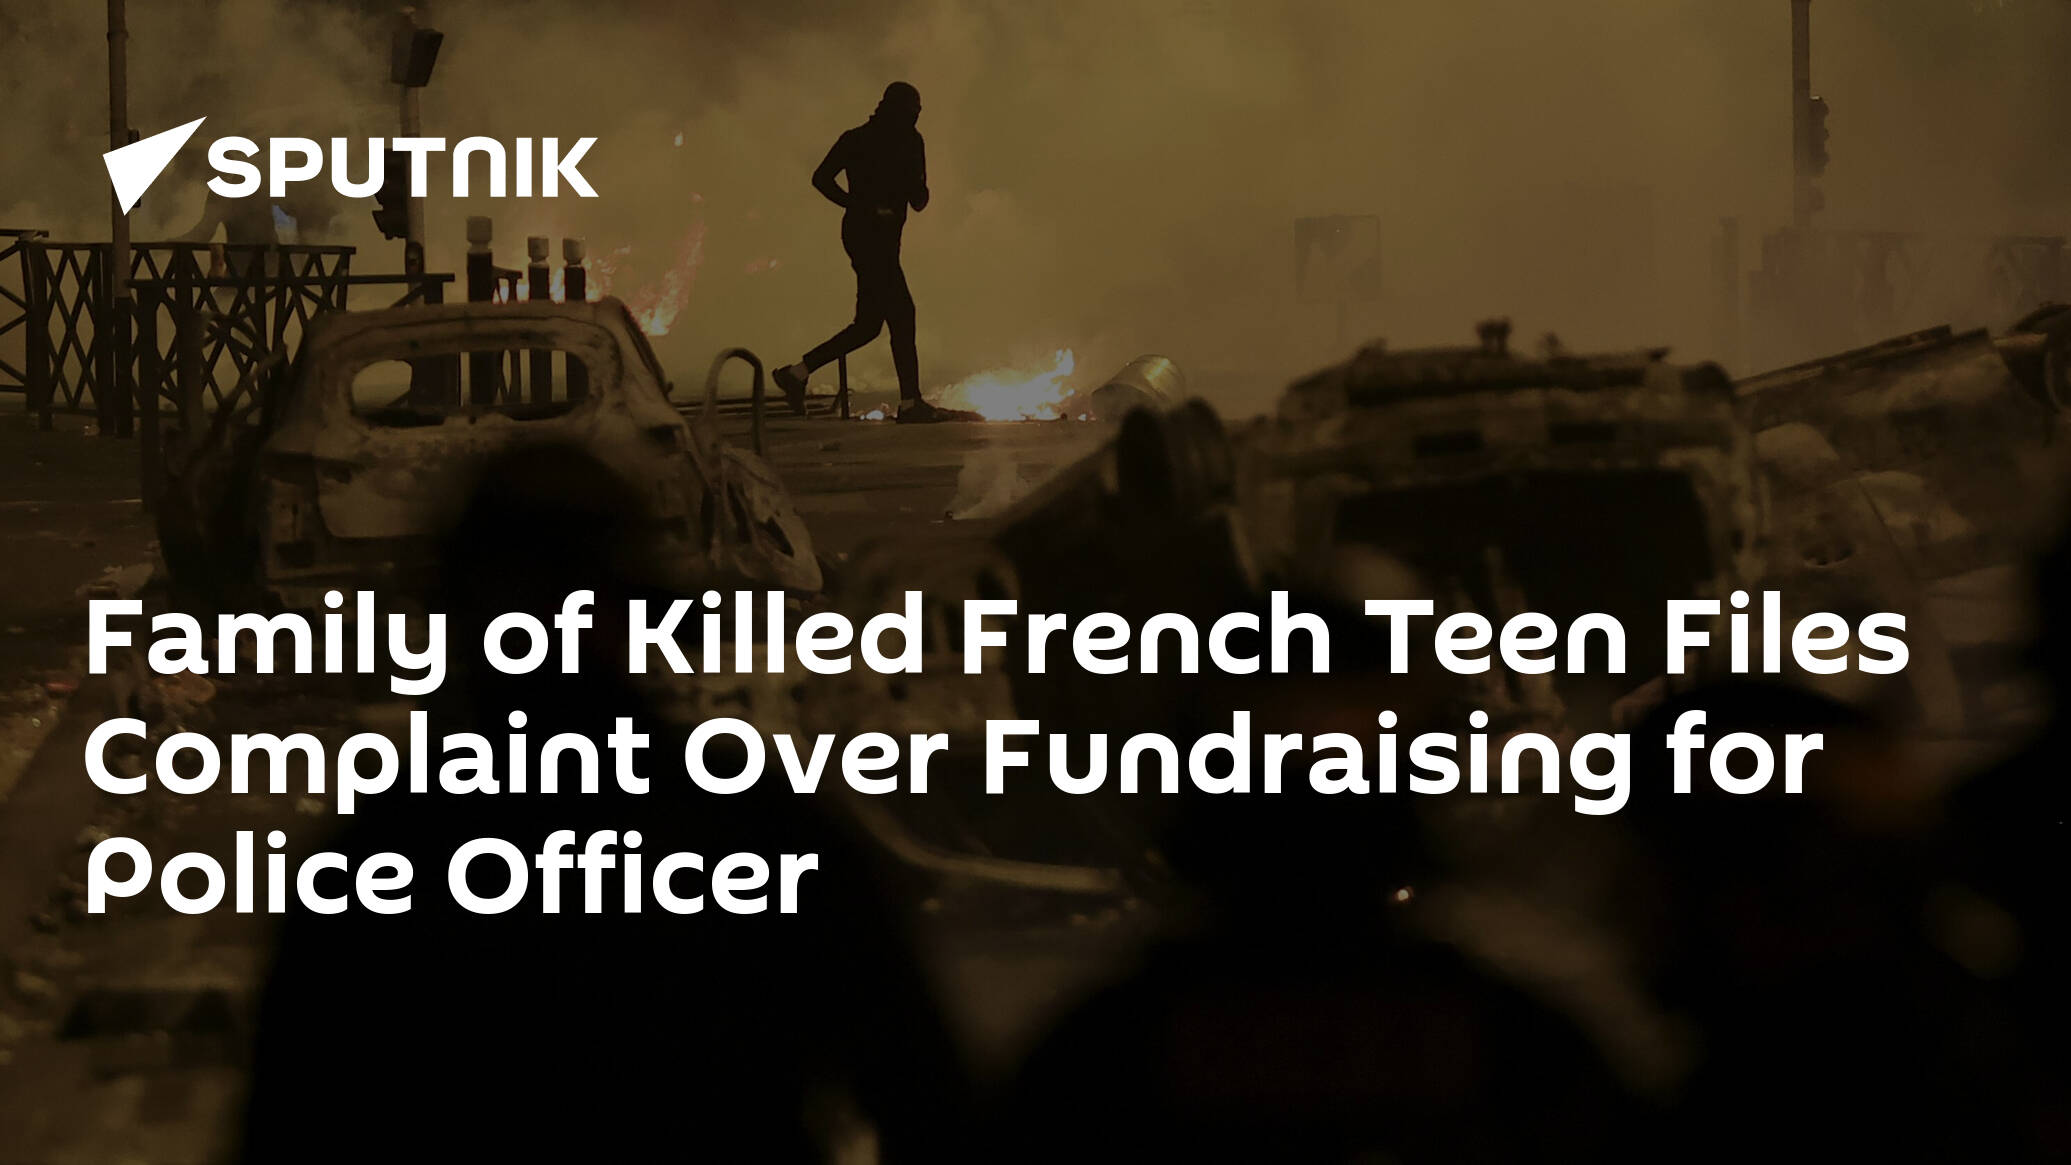 Family of Killed French Teen Files Complaint Over Fundraising for Police Officer